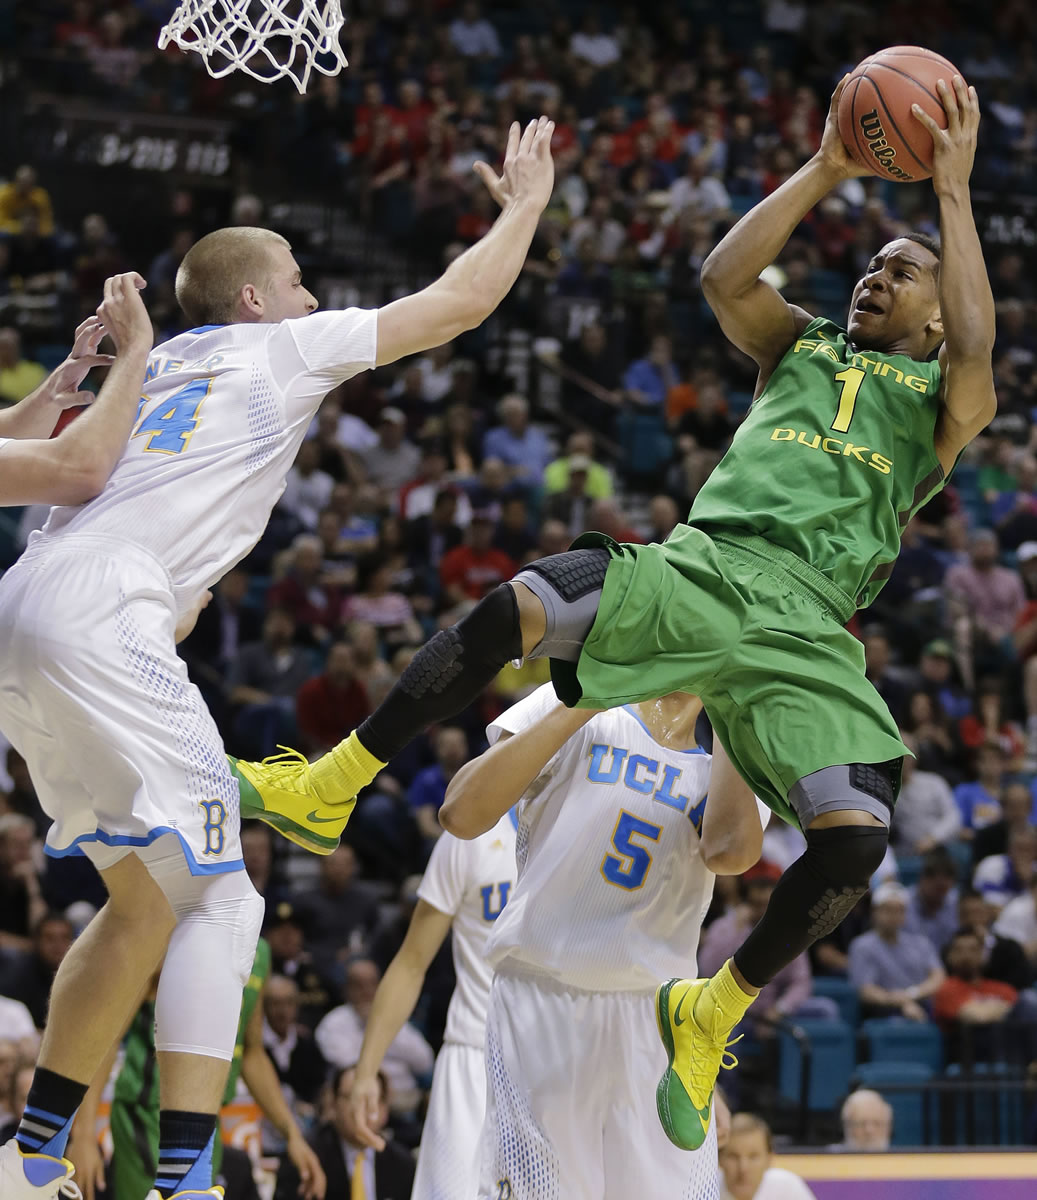 Oregon's Dominic Artis (1) puts up an off-balance shot against UCLA's Travis Wear in the second half of an NCAA Pac-12 conference tournament quarterfinal college basketball game on Thursday, March 13, 2014, in Las Vegas. UCLA won 82-63.